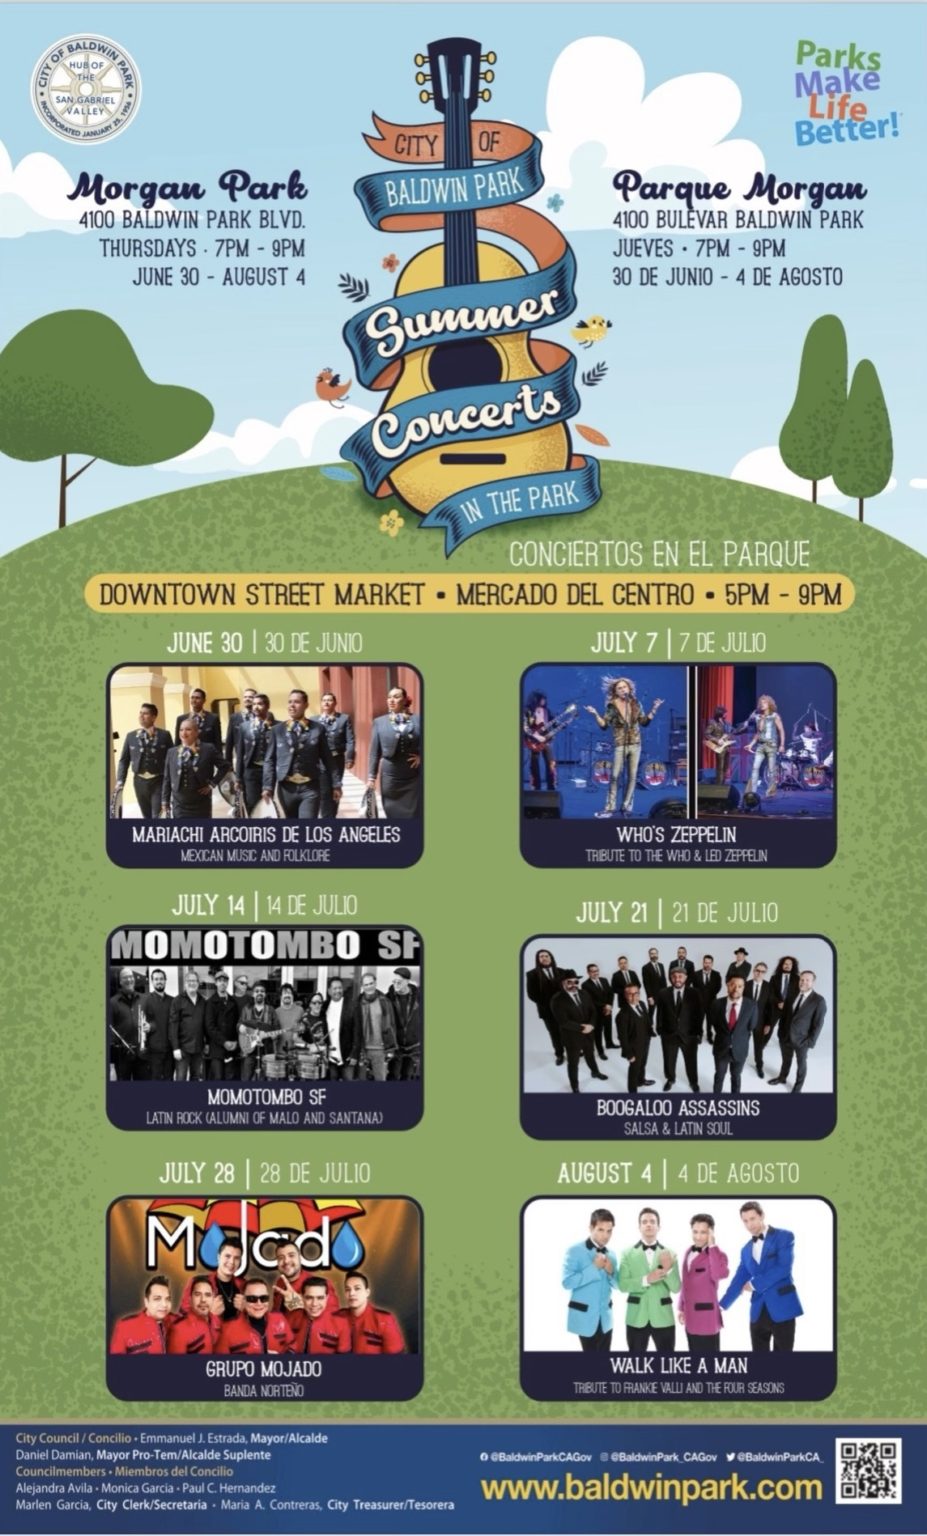 City of Baldwin Park Summer Concerts in the Park Boogaloo Assassins